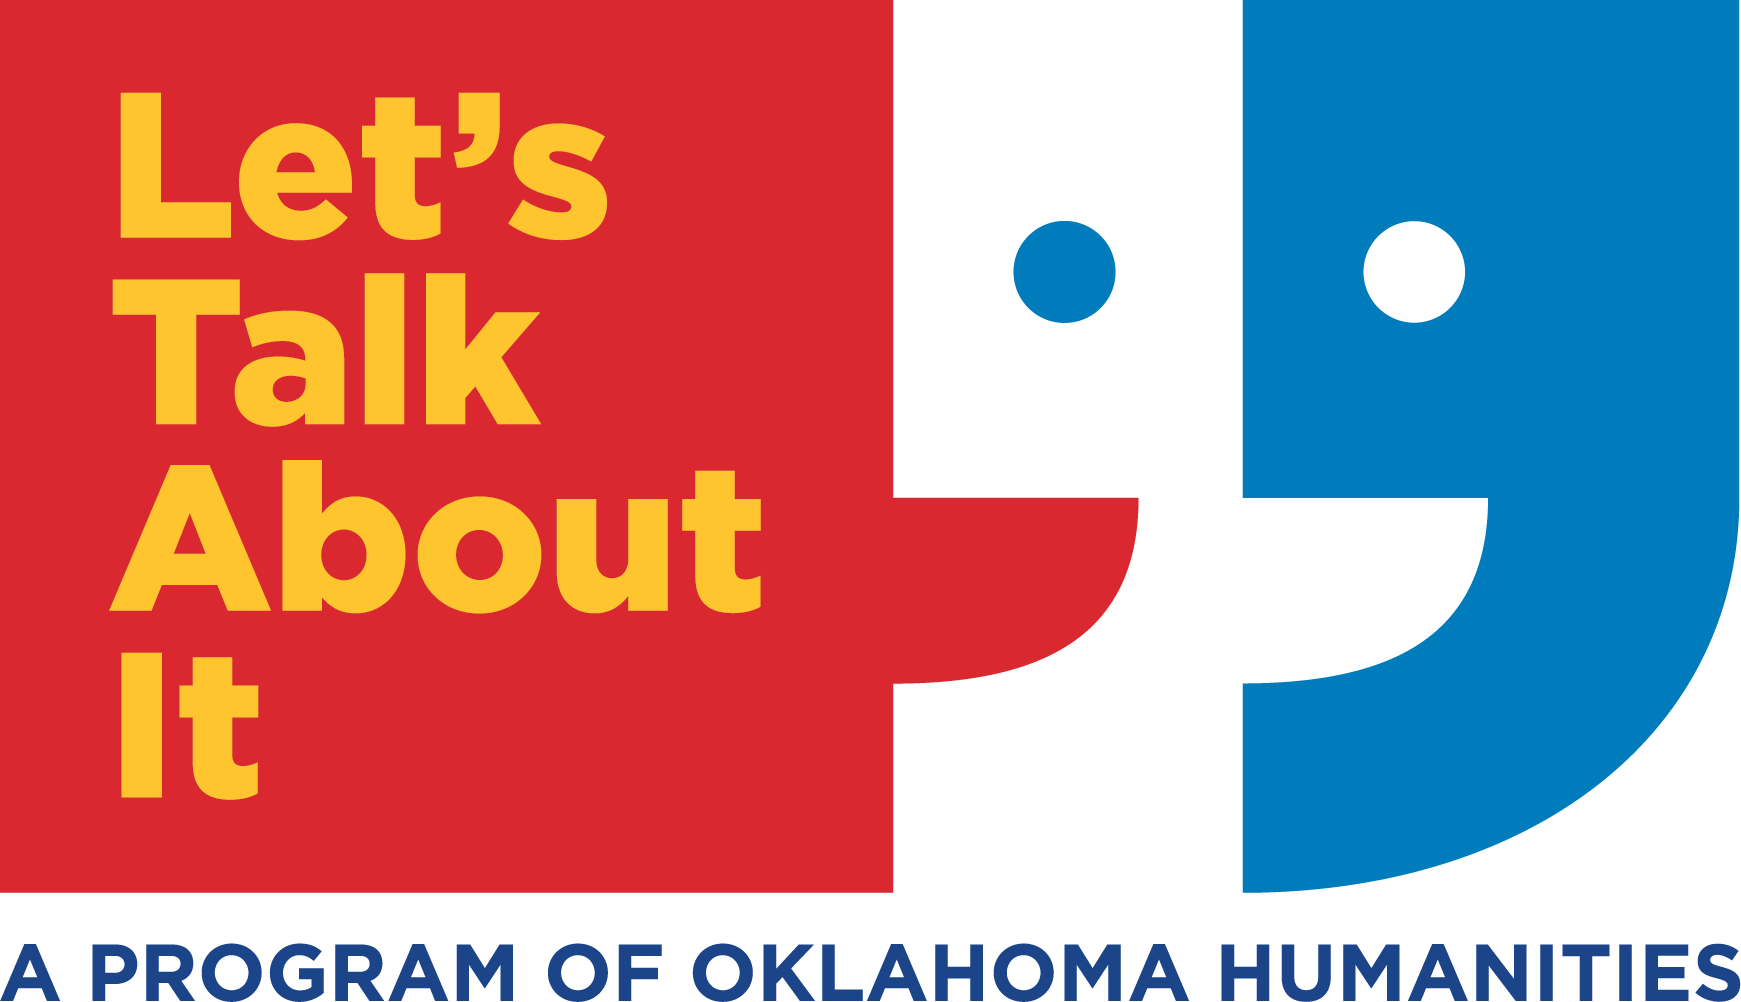 Let's Talk About It: A Program of Oklahoma Humanities Logo
Click to see info on the current Miami Public Library Let's Talk About It Book Discussions.